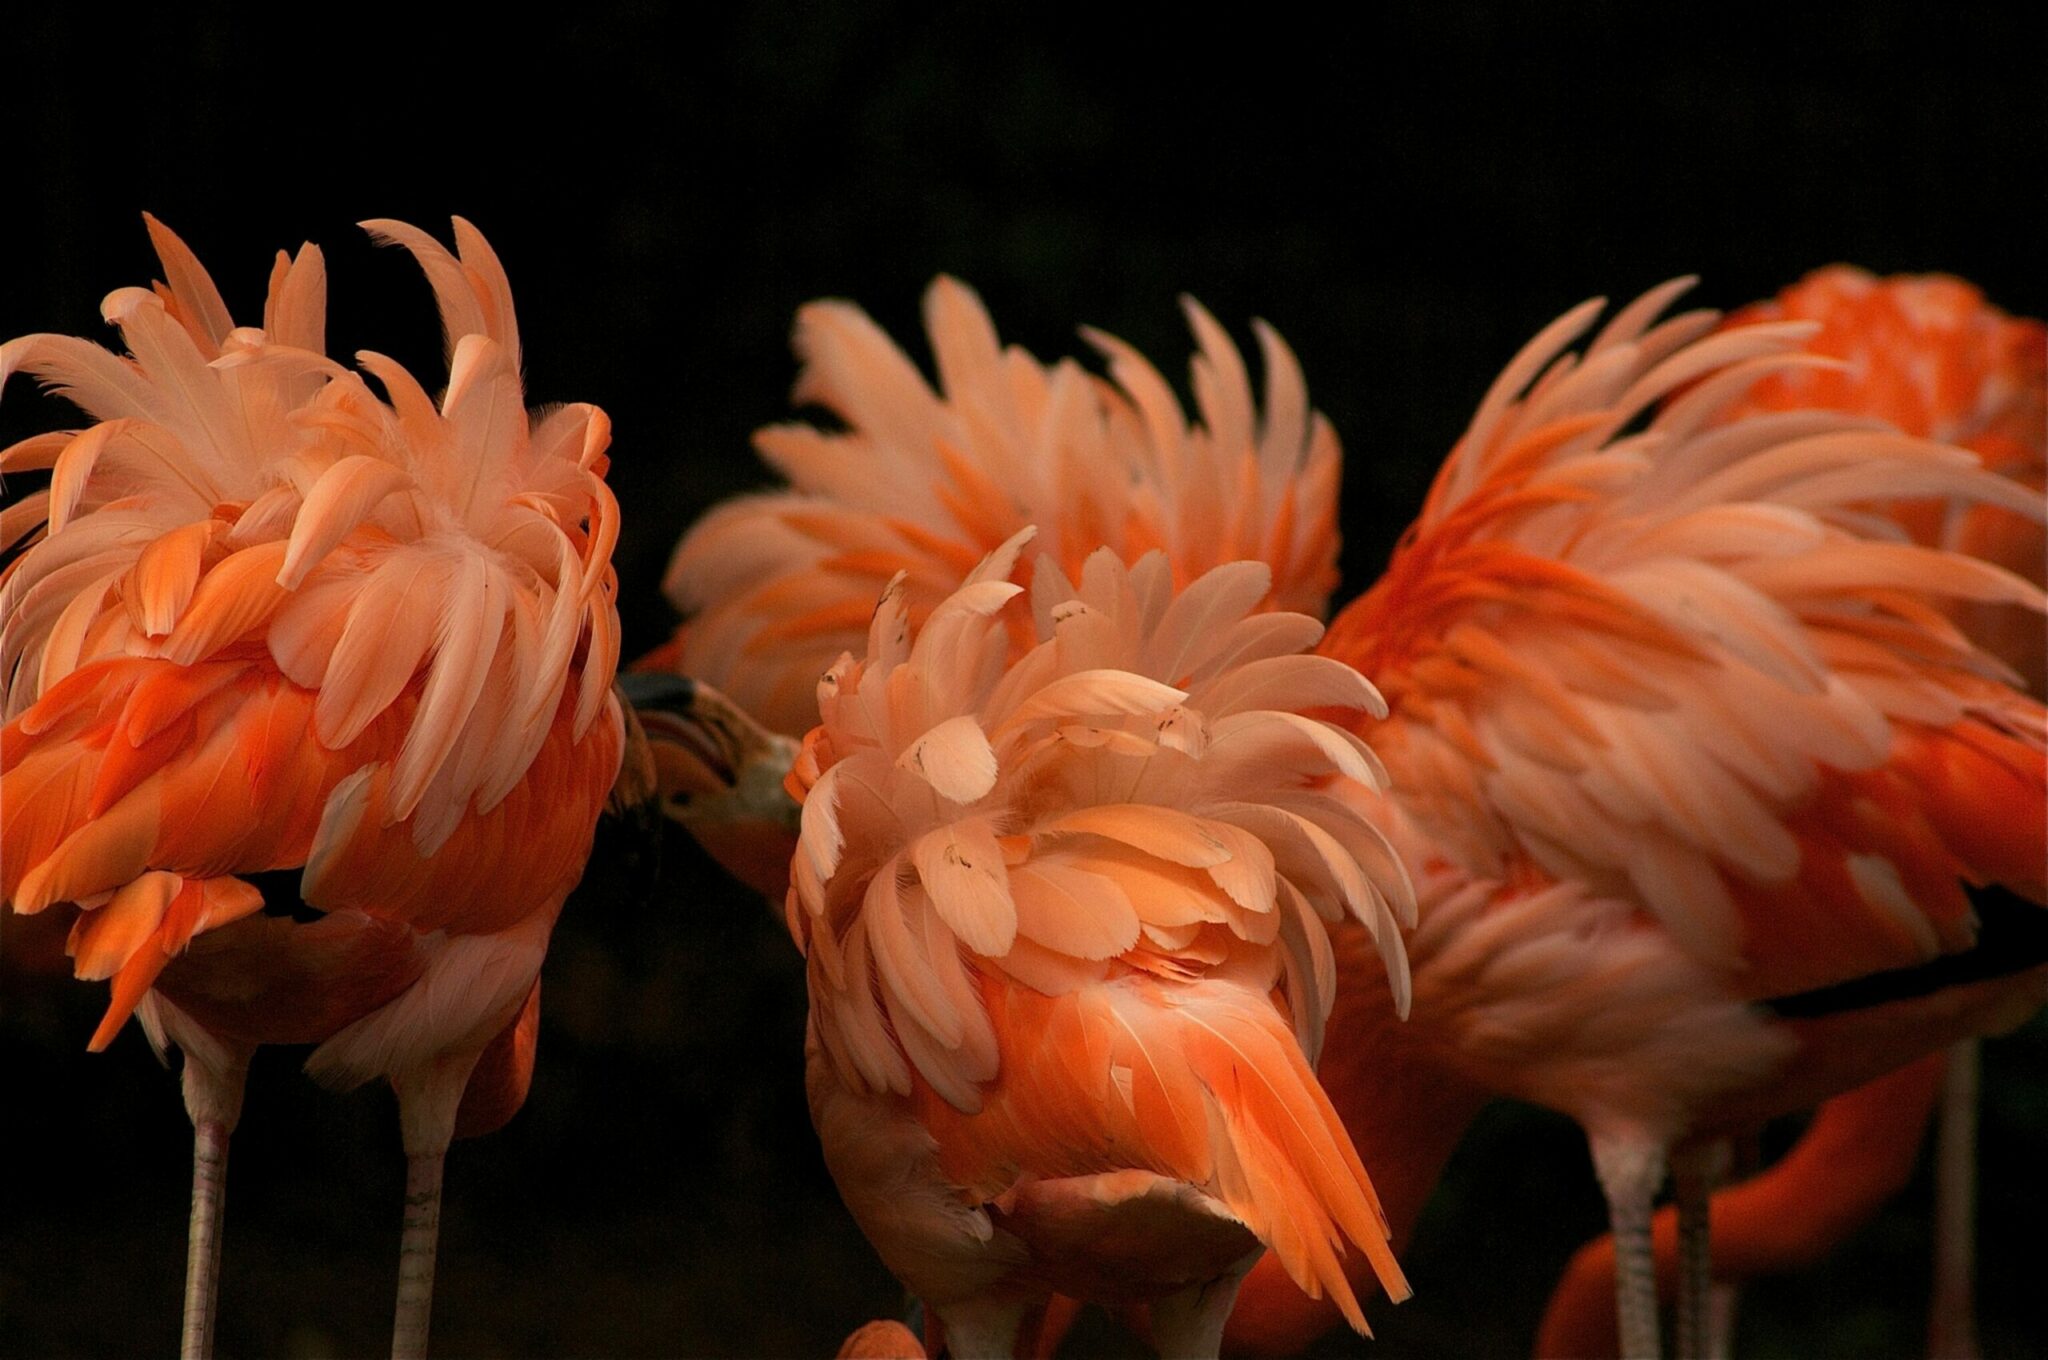 do flamingos come in different colors besides pink